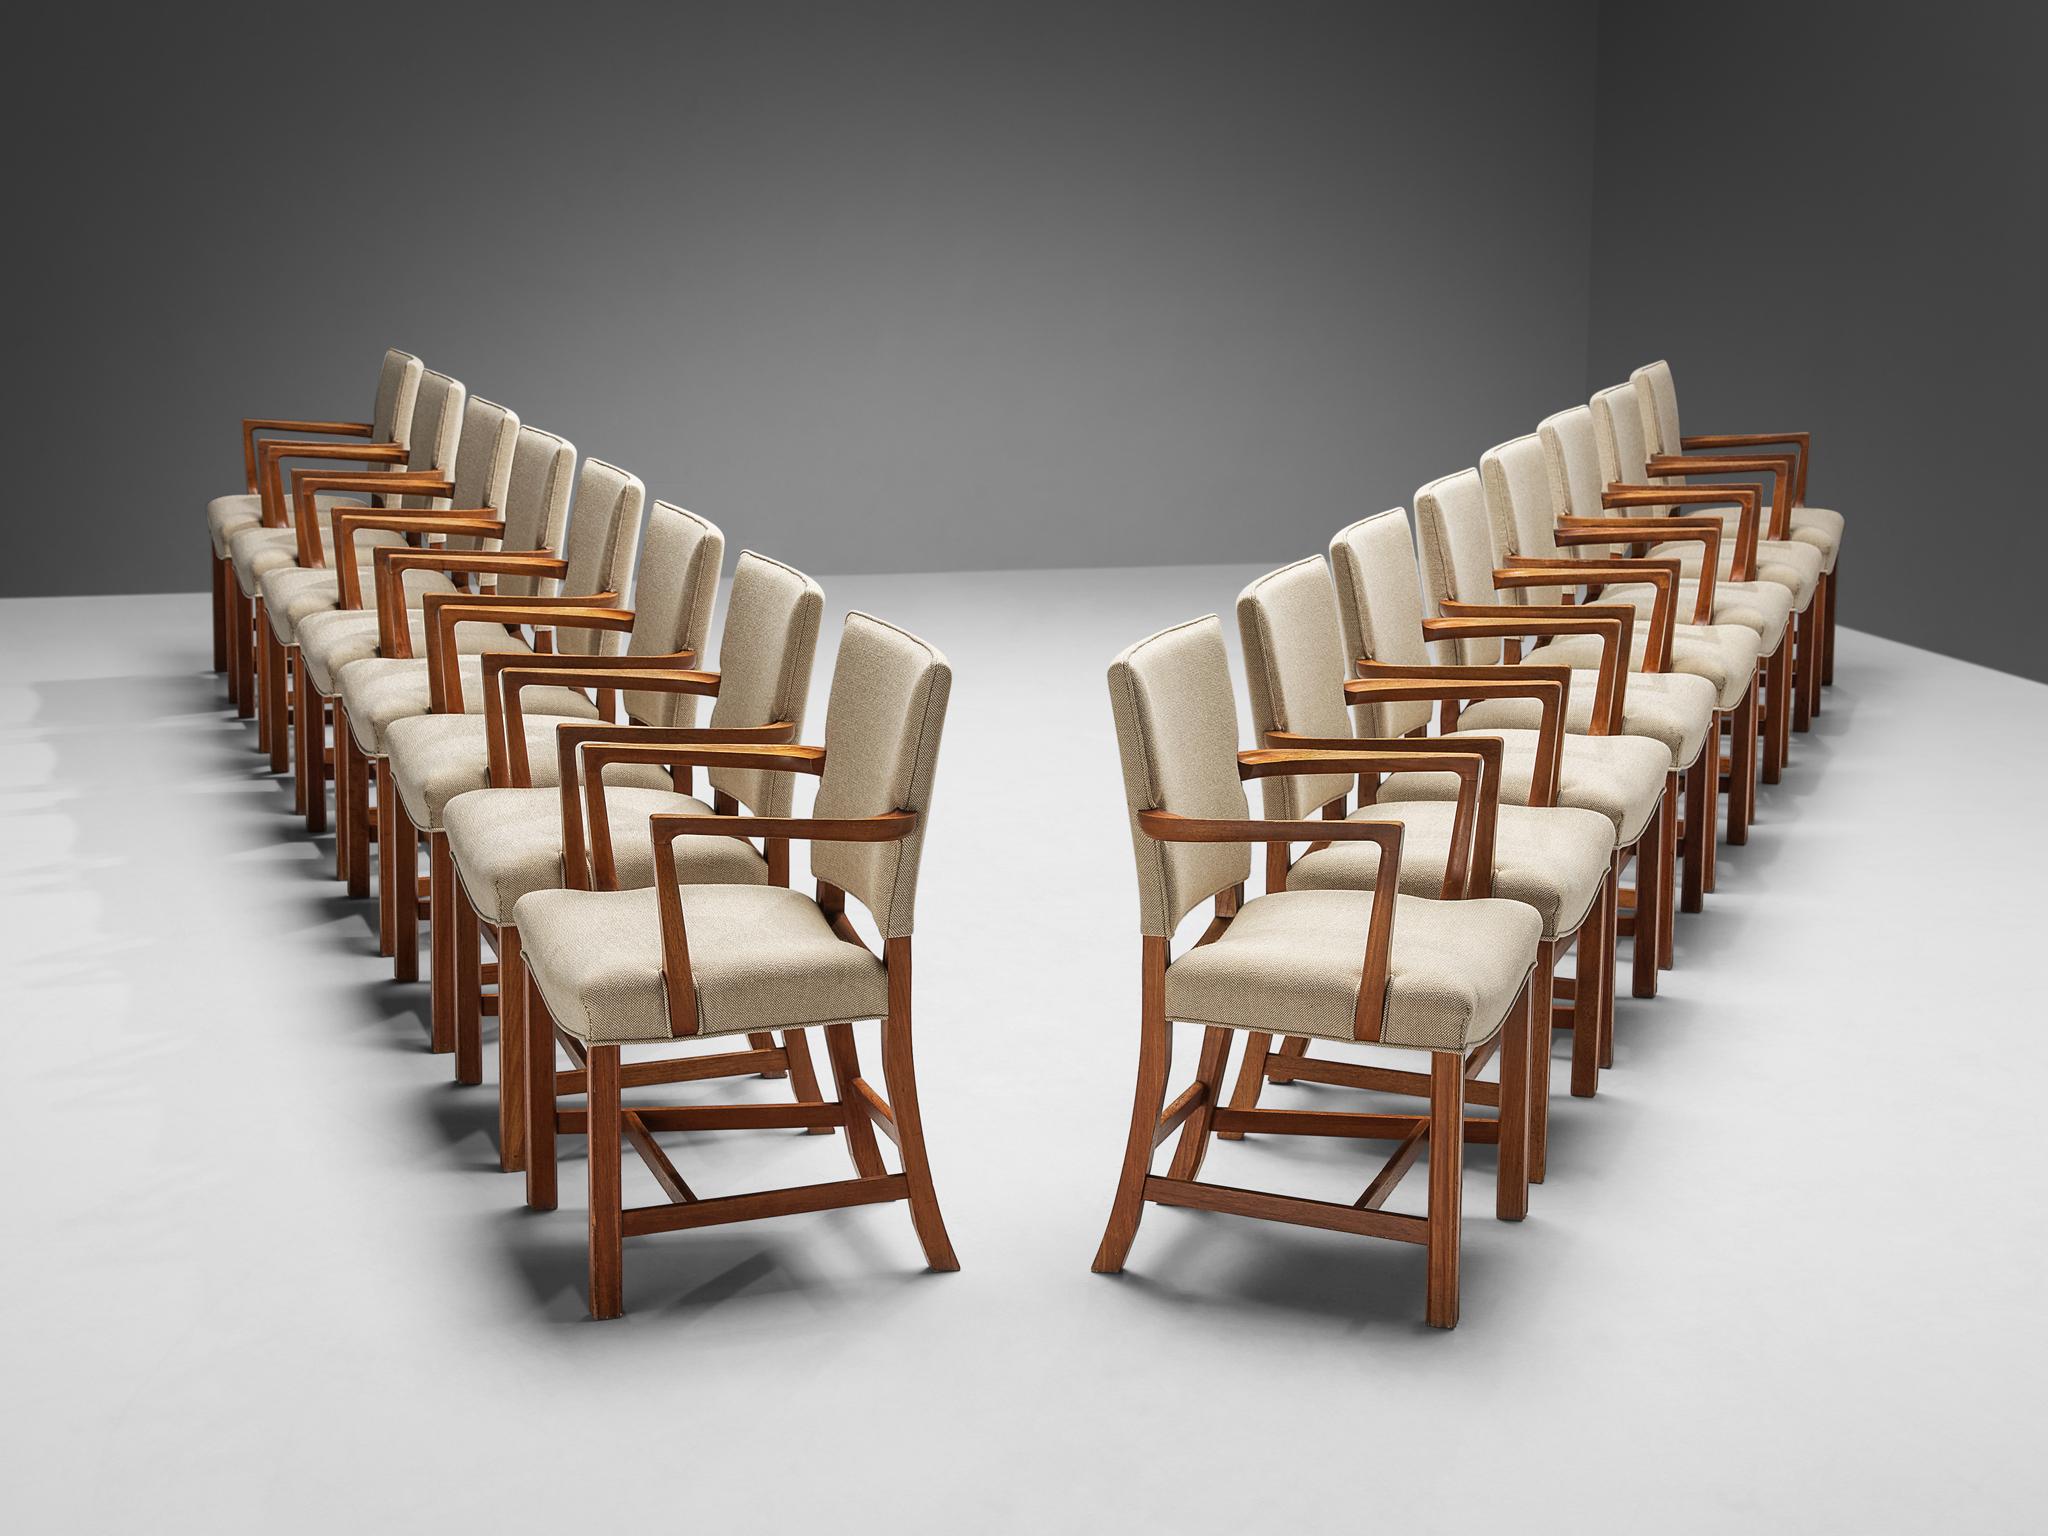 Kaare Klint for Rud Rasmussens Snedkerier, set of sixteen armchairs, model '3758A', teak, fabric, Denmark, design 1927. 

This large set of 16 dining chairs designed by Kaare Klint is special to come by. These chairs have very elegantly sculpted